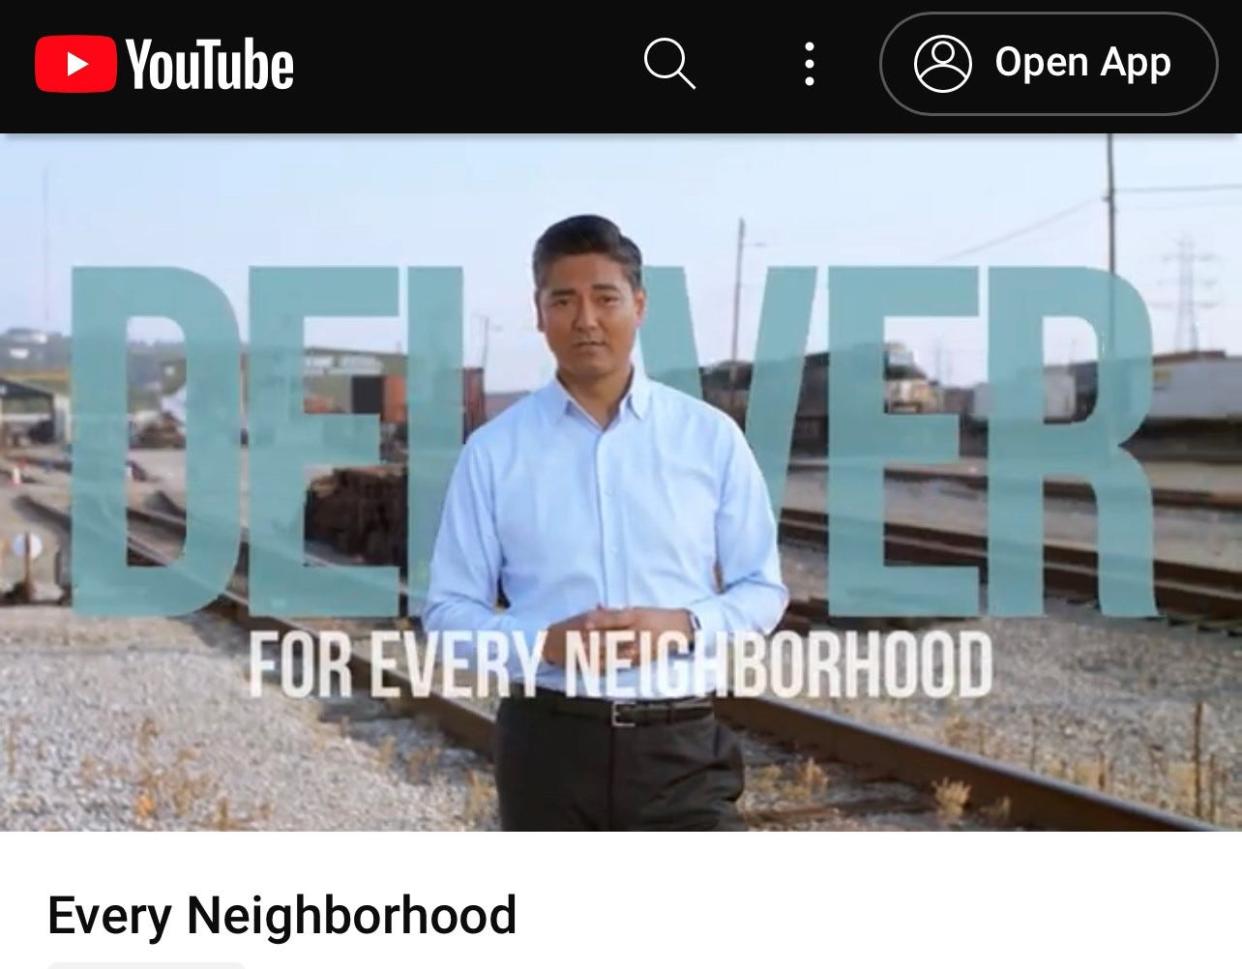 Image from "Every Neighborhood" campaign commercial, which features Cincinnati Mayor Aftab Pureval urging voters to approve the sale of the city-owned Cincinnati Southern Railway on Nov. 7. A citizen filed a complaint with the Ohio Elections Commission questioning the legality of Pureval's role in the commercial.